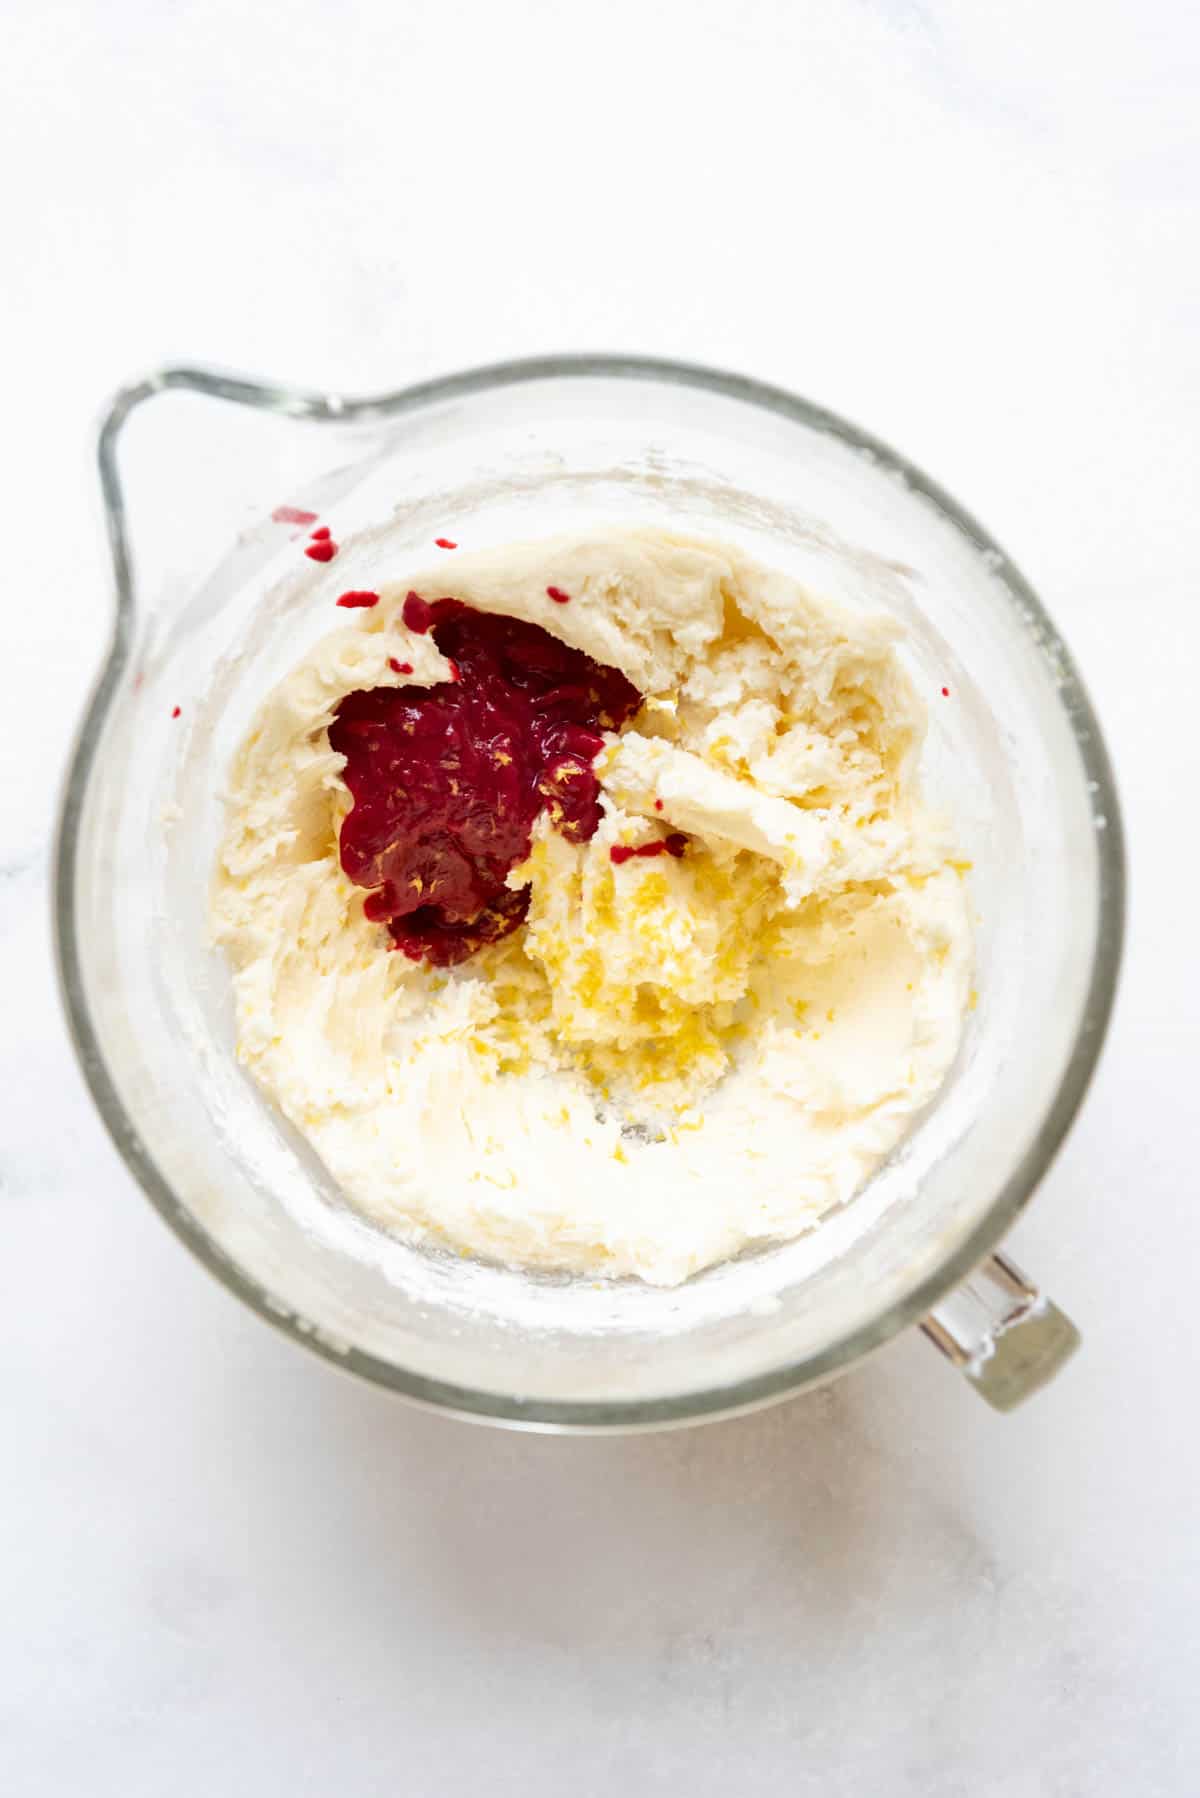 Top view of glass mixing jug with butter, vanilla, powdered sugar, lemon zest, and reduced raspberry puree in it.